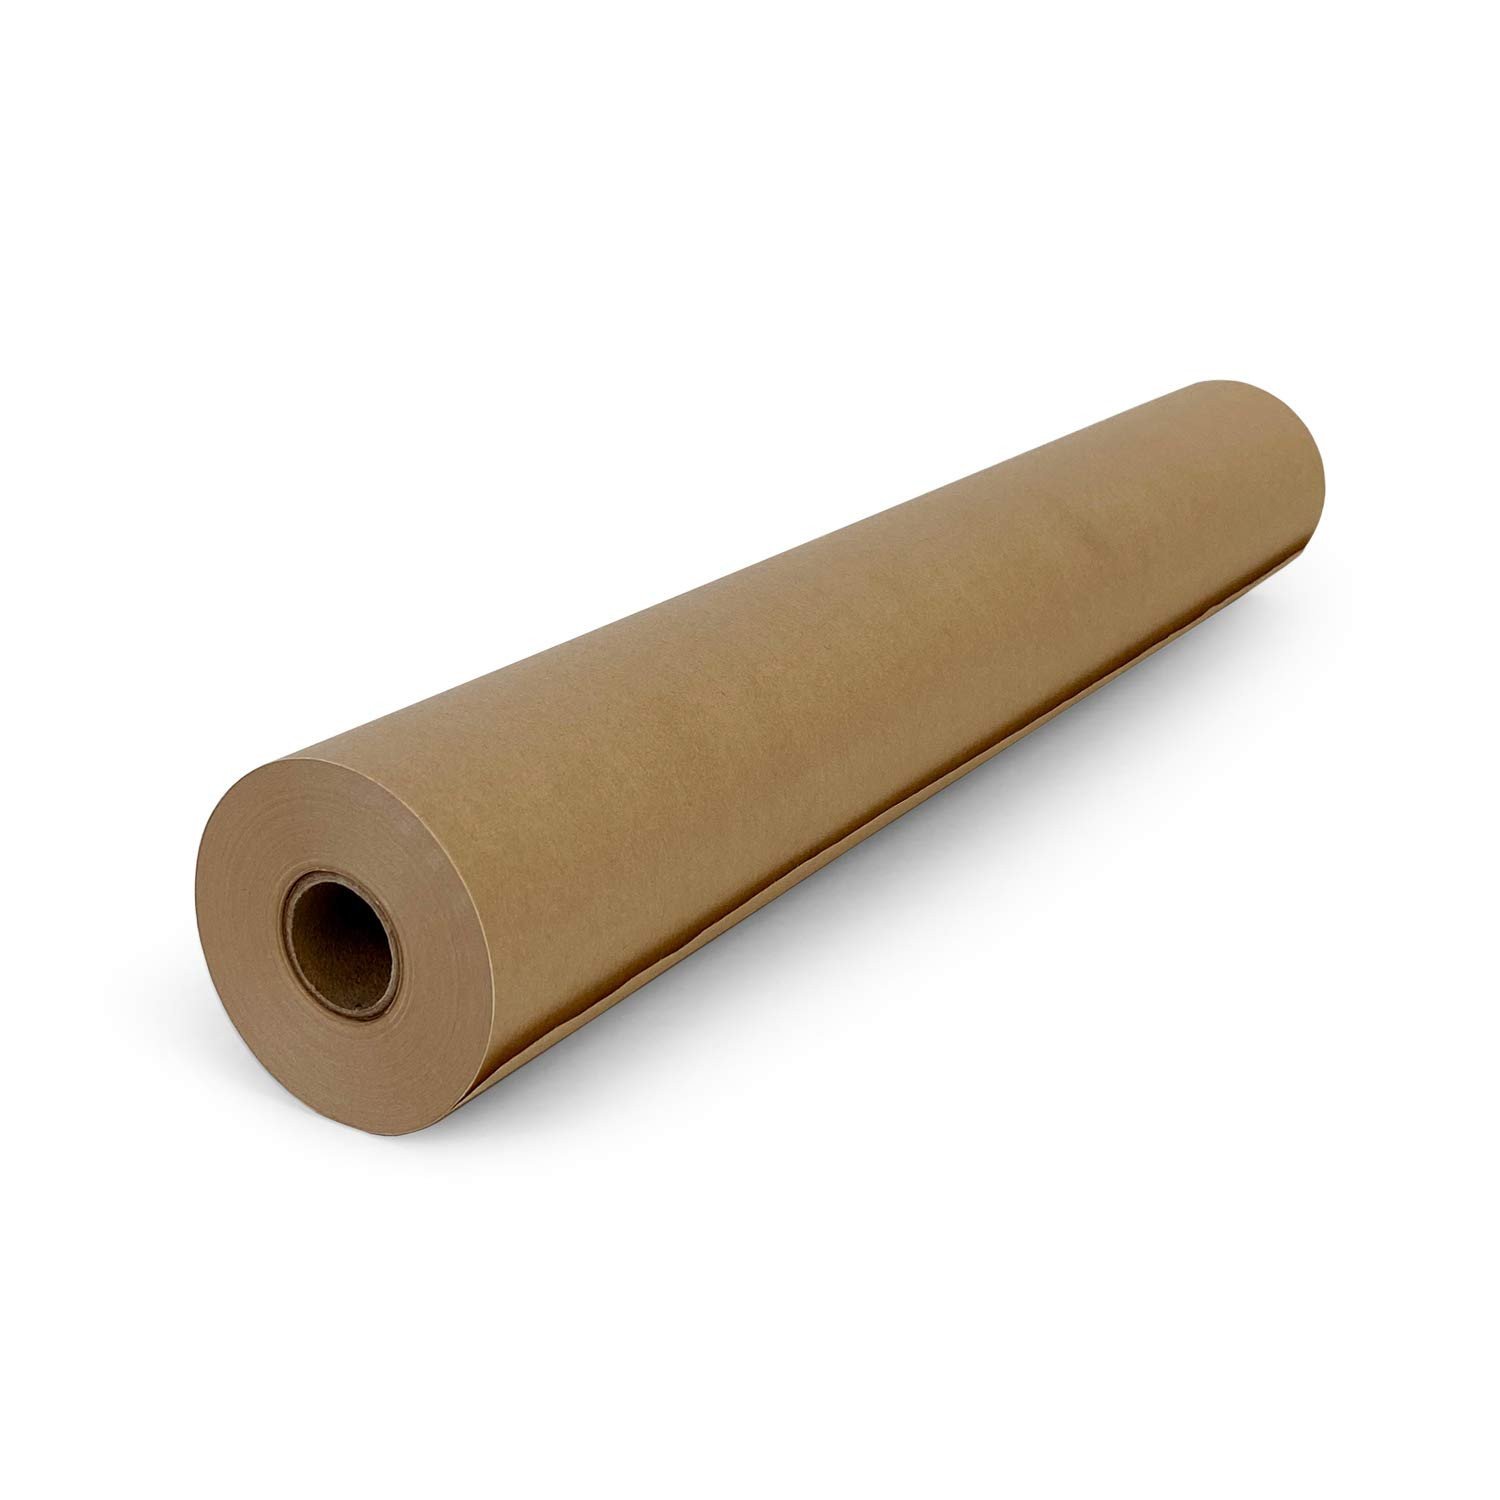 Brown Kraft Paper Roll 48 X 800' - Often used in cutting rooms